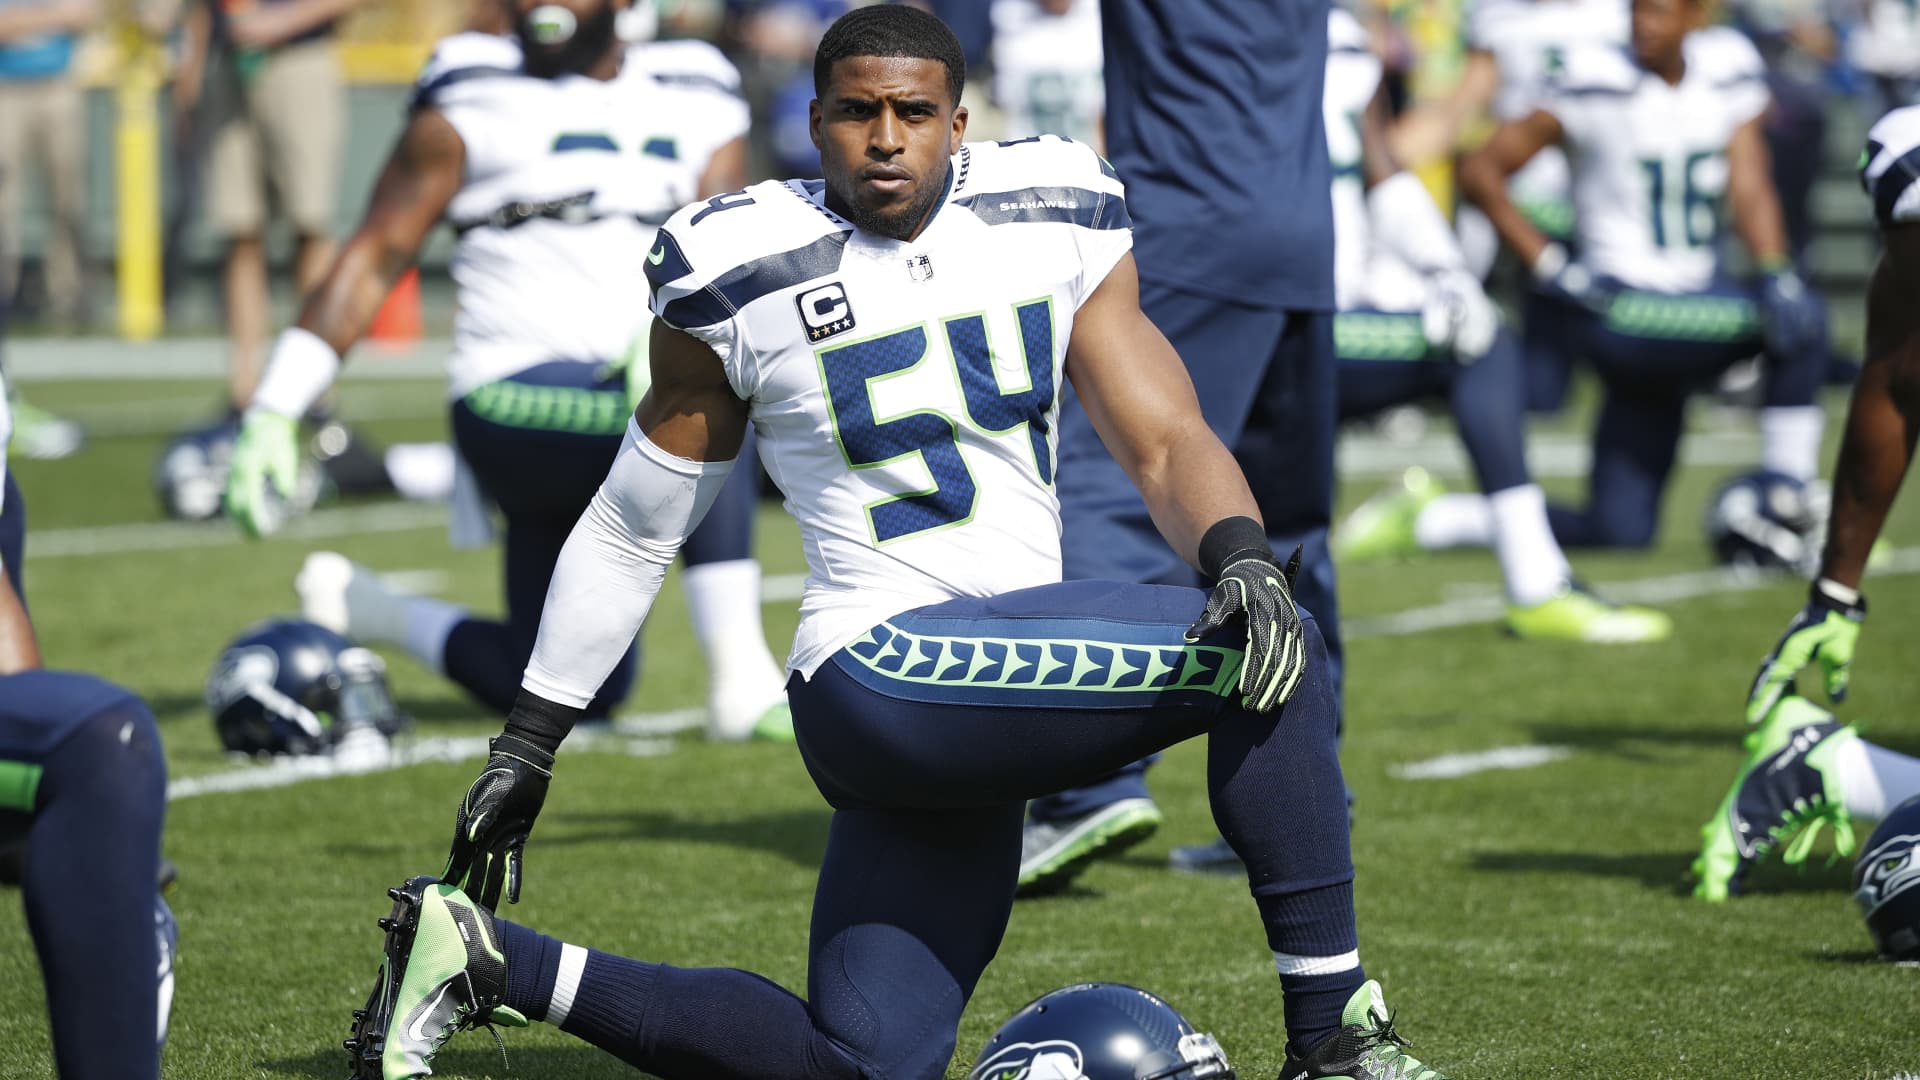 Bobby Wagner #54 of the Seattle Seahawks stretches before a game against the Green Bay Packers at Lambeau Field on September 10, 2017 in Green Bay, Wisconsin.